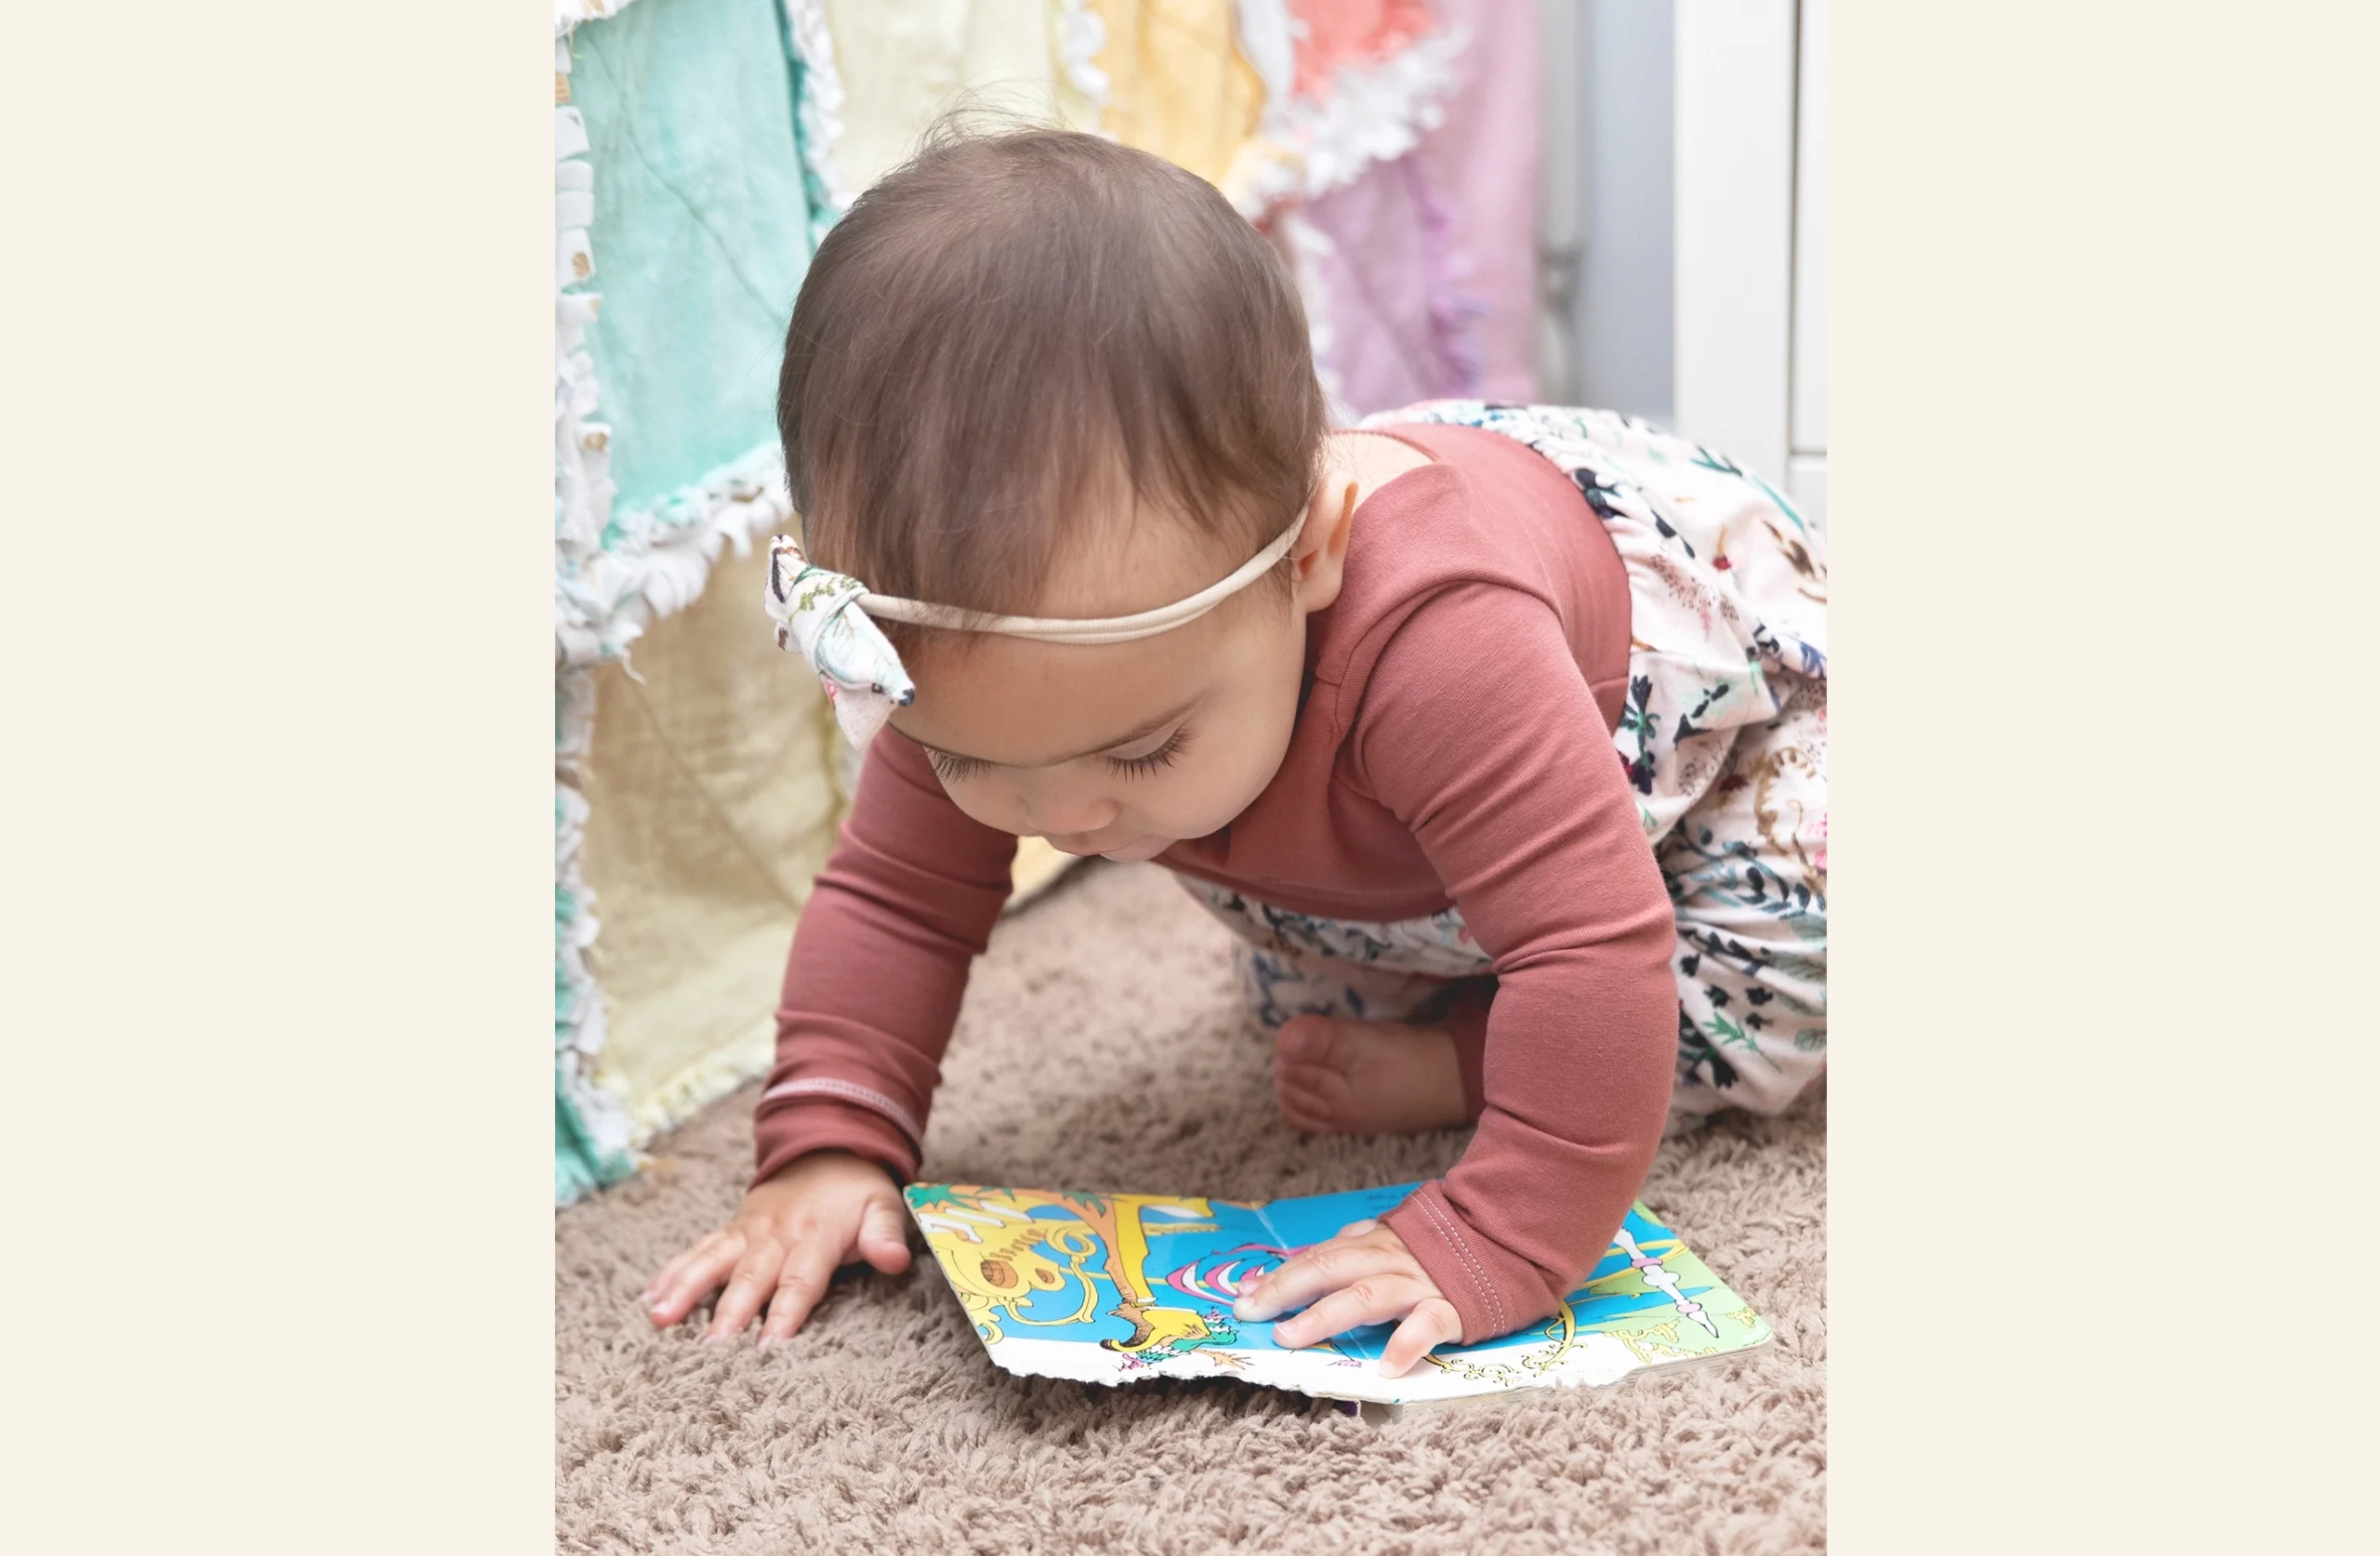 Baby bending to look at book